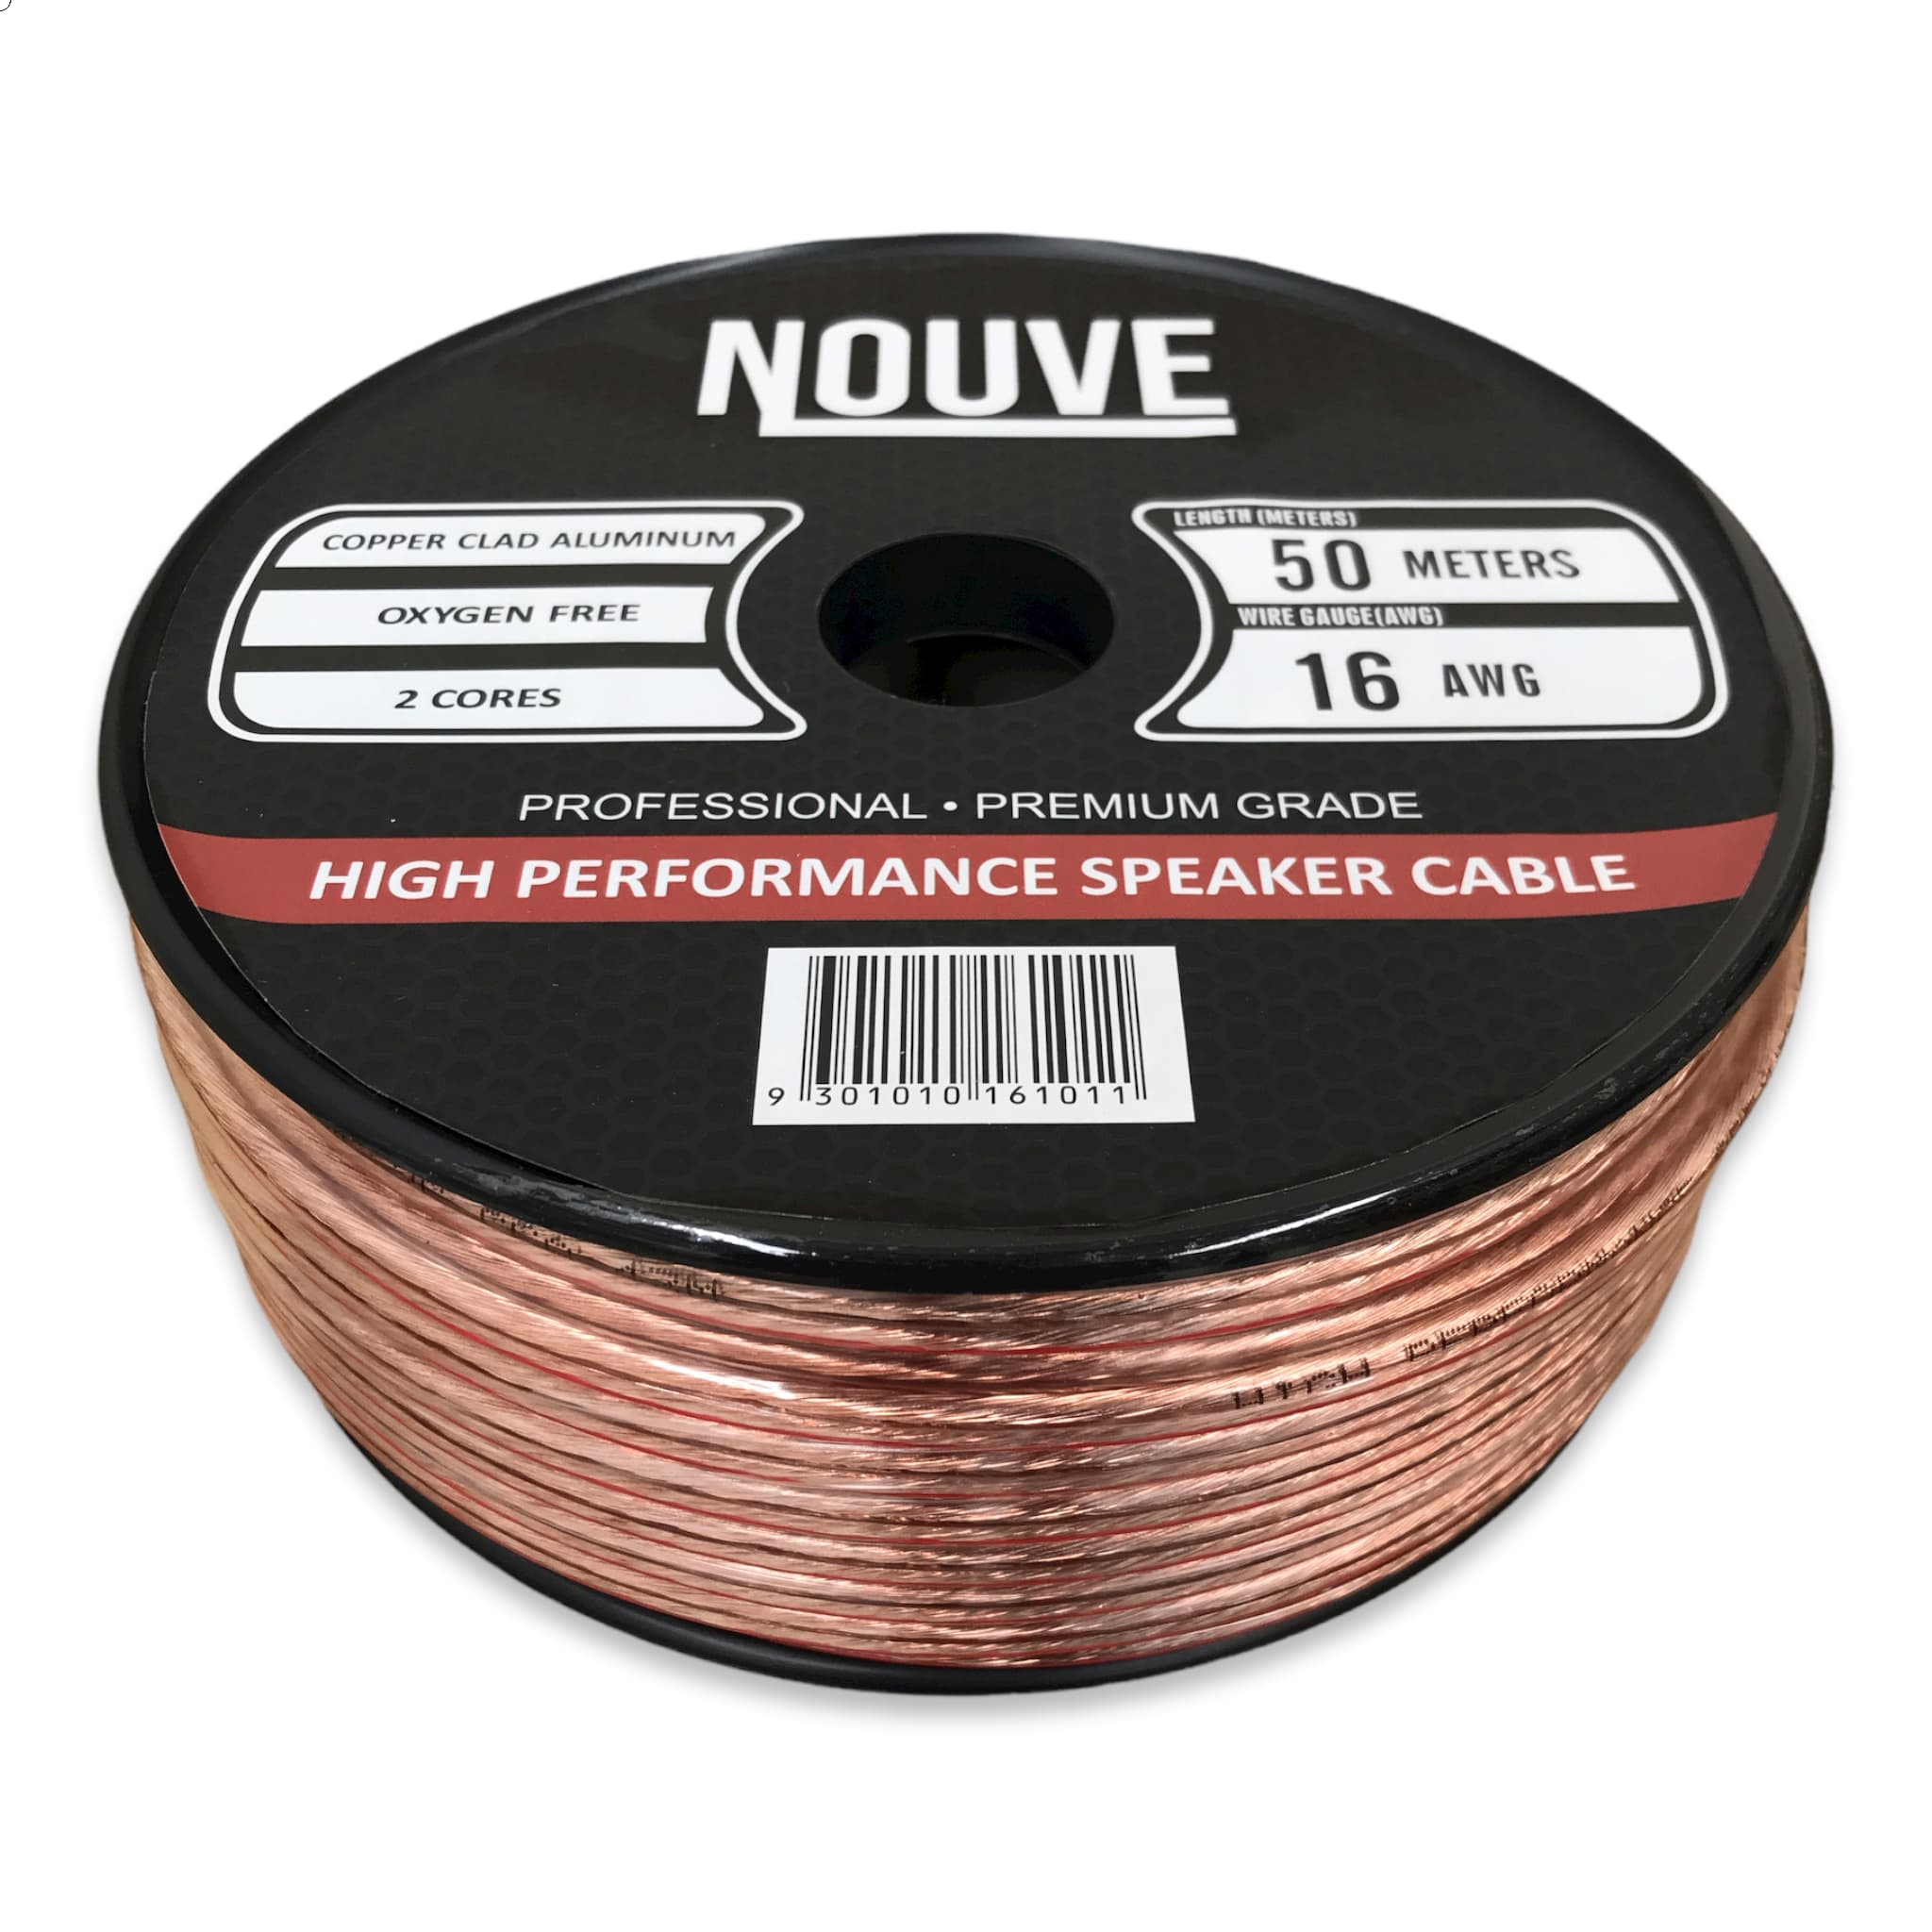 16 awg speaker cable 50m cca